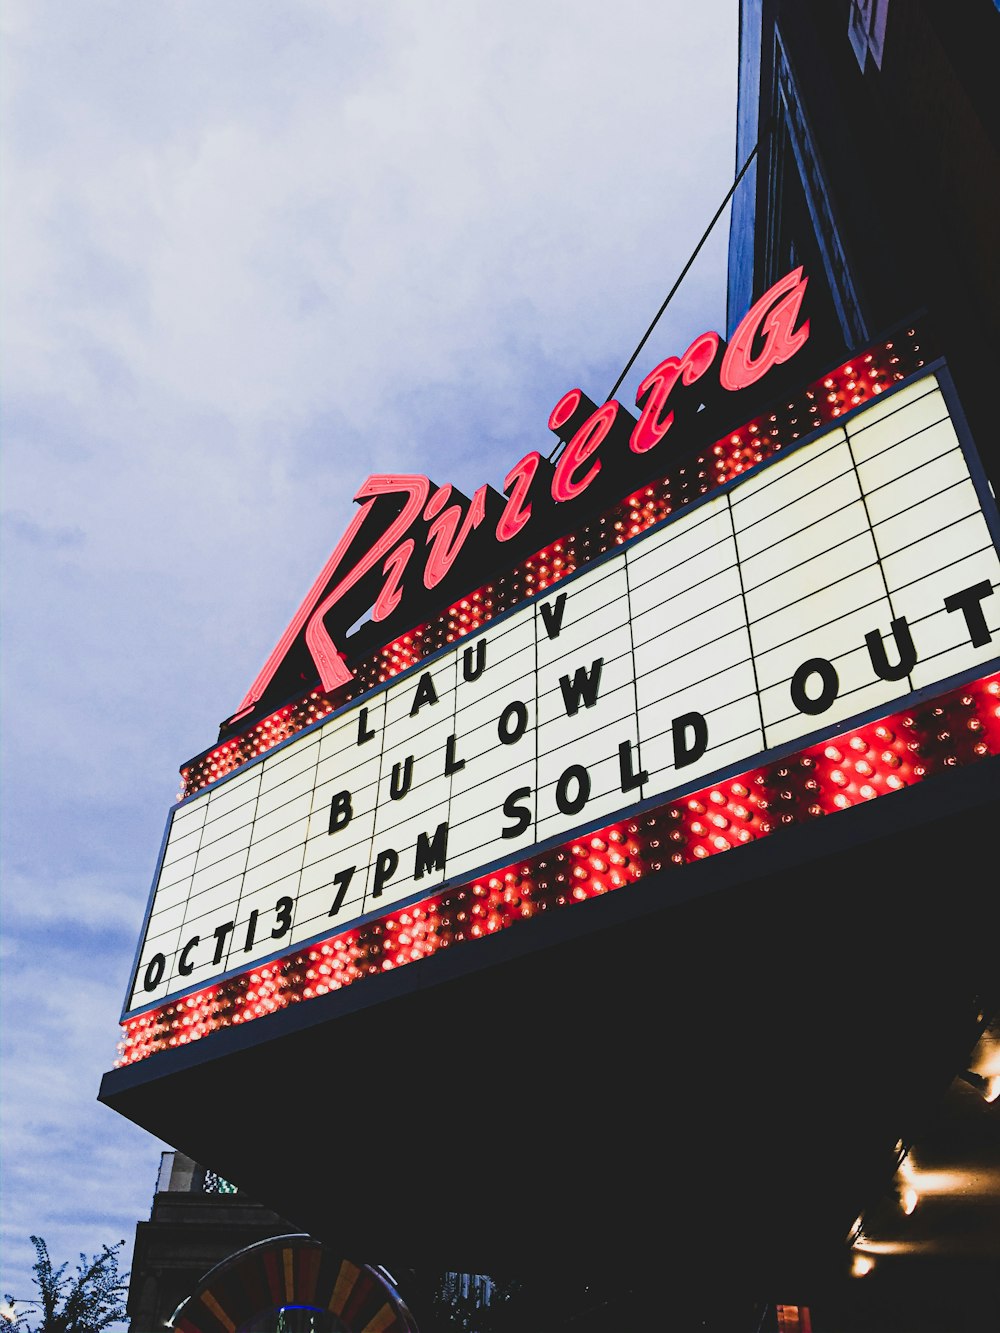 Riviera Lauv Bulow Oct 13 7pm sold out signage